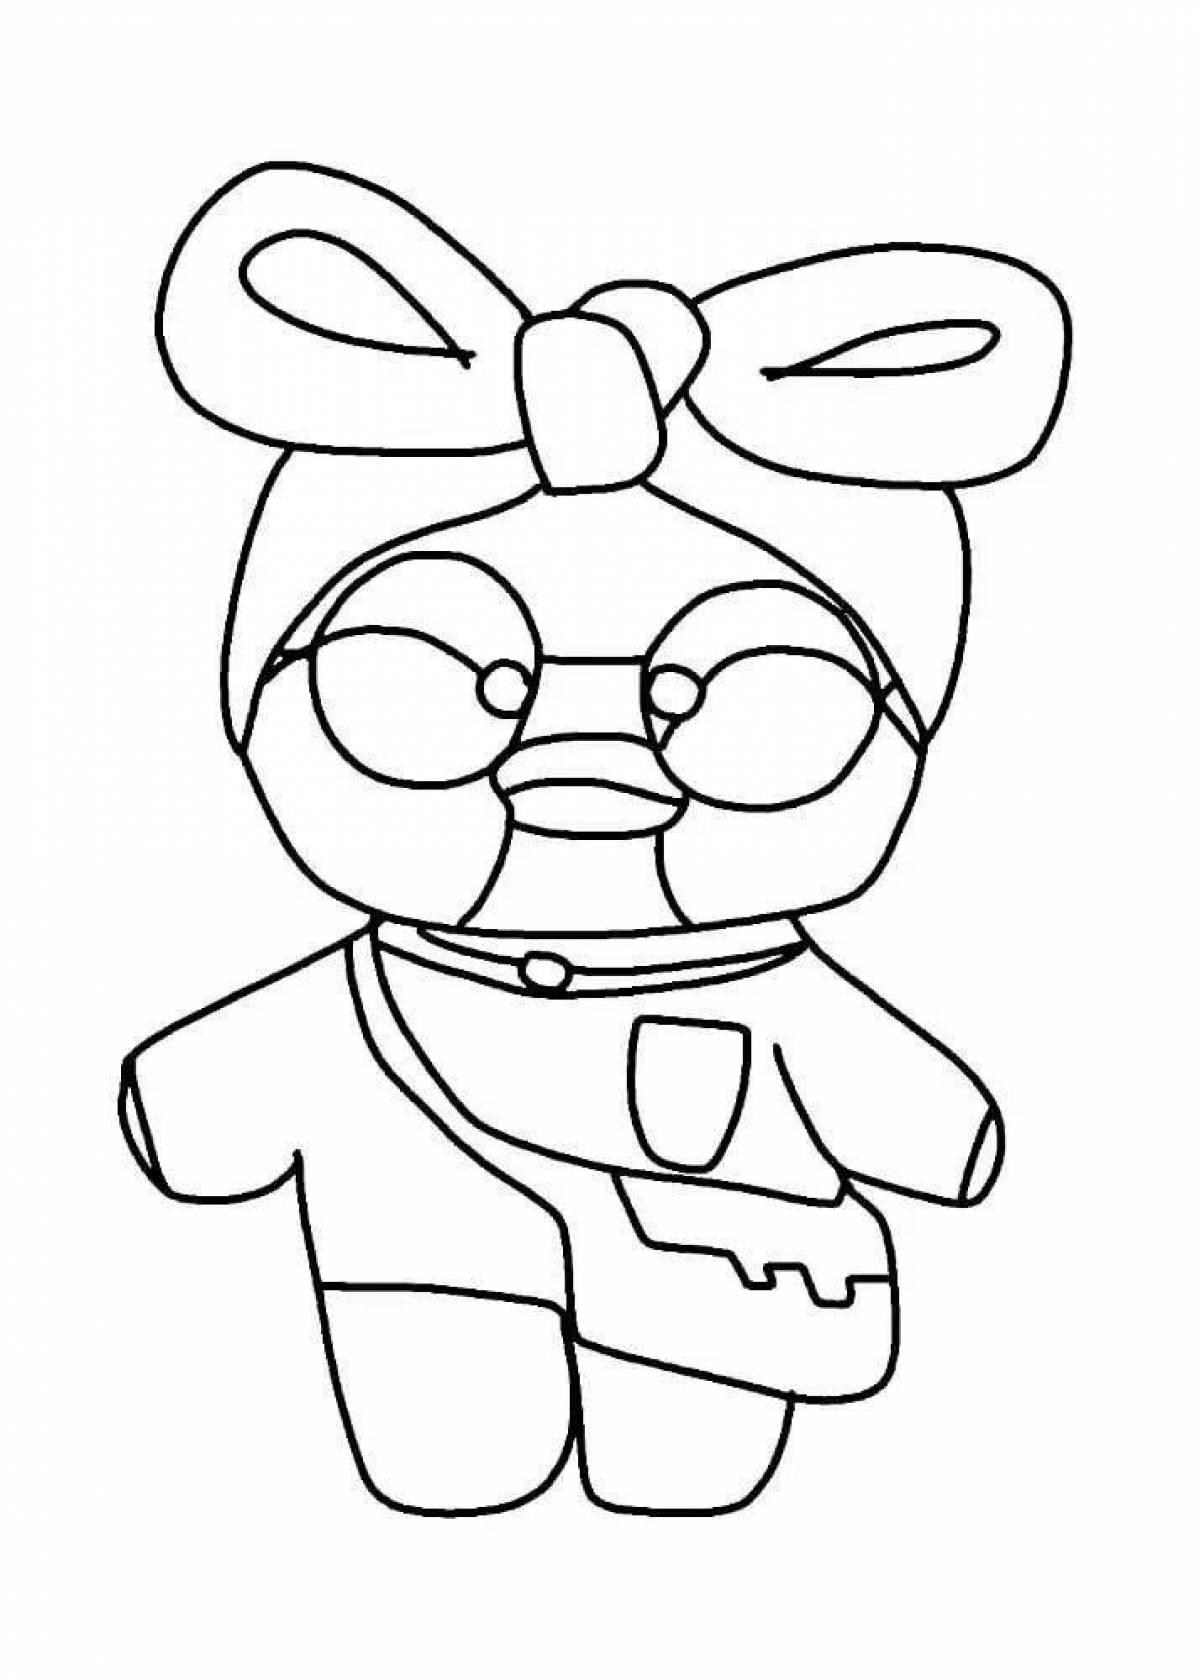 Fanfan duck coloring page